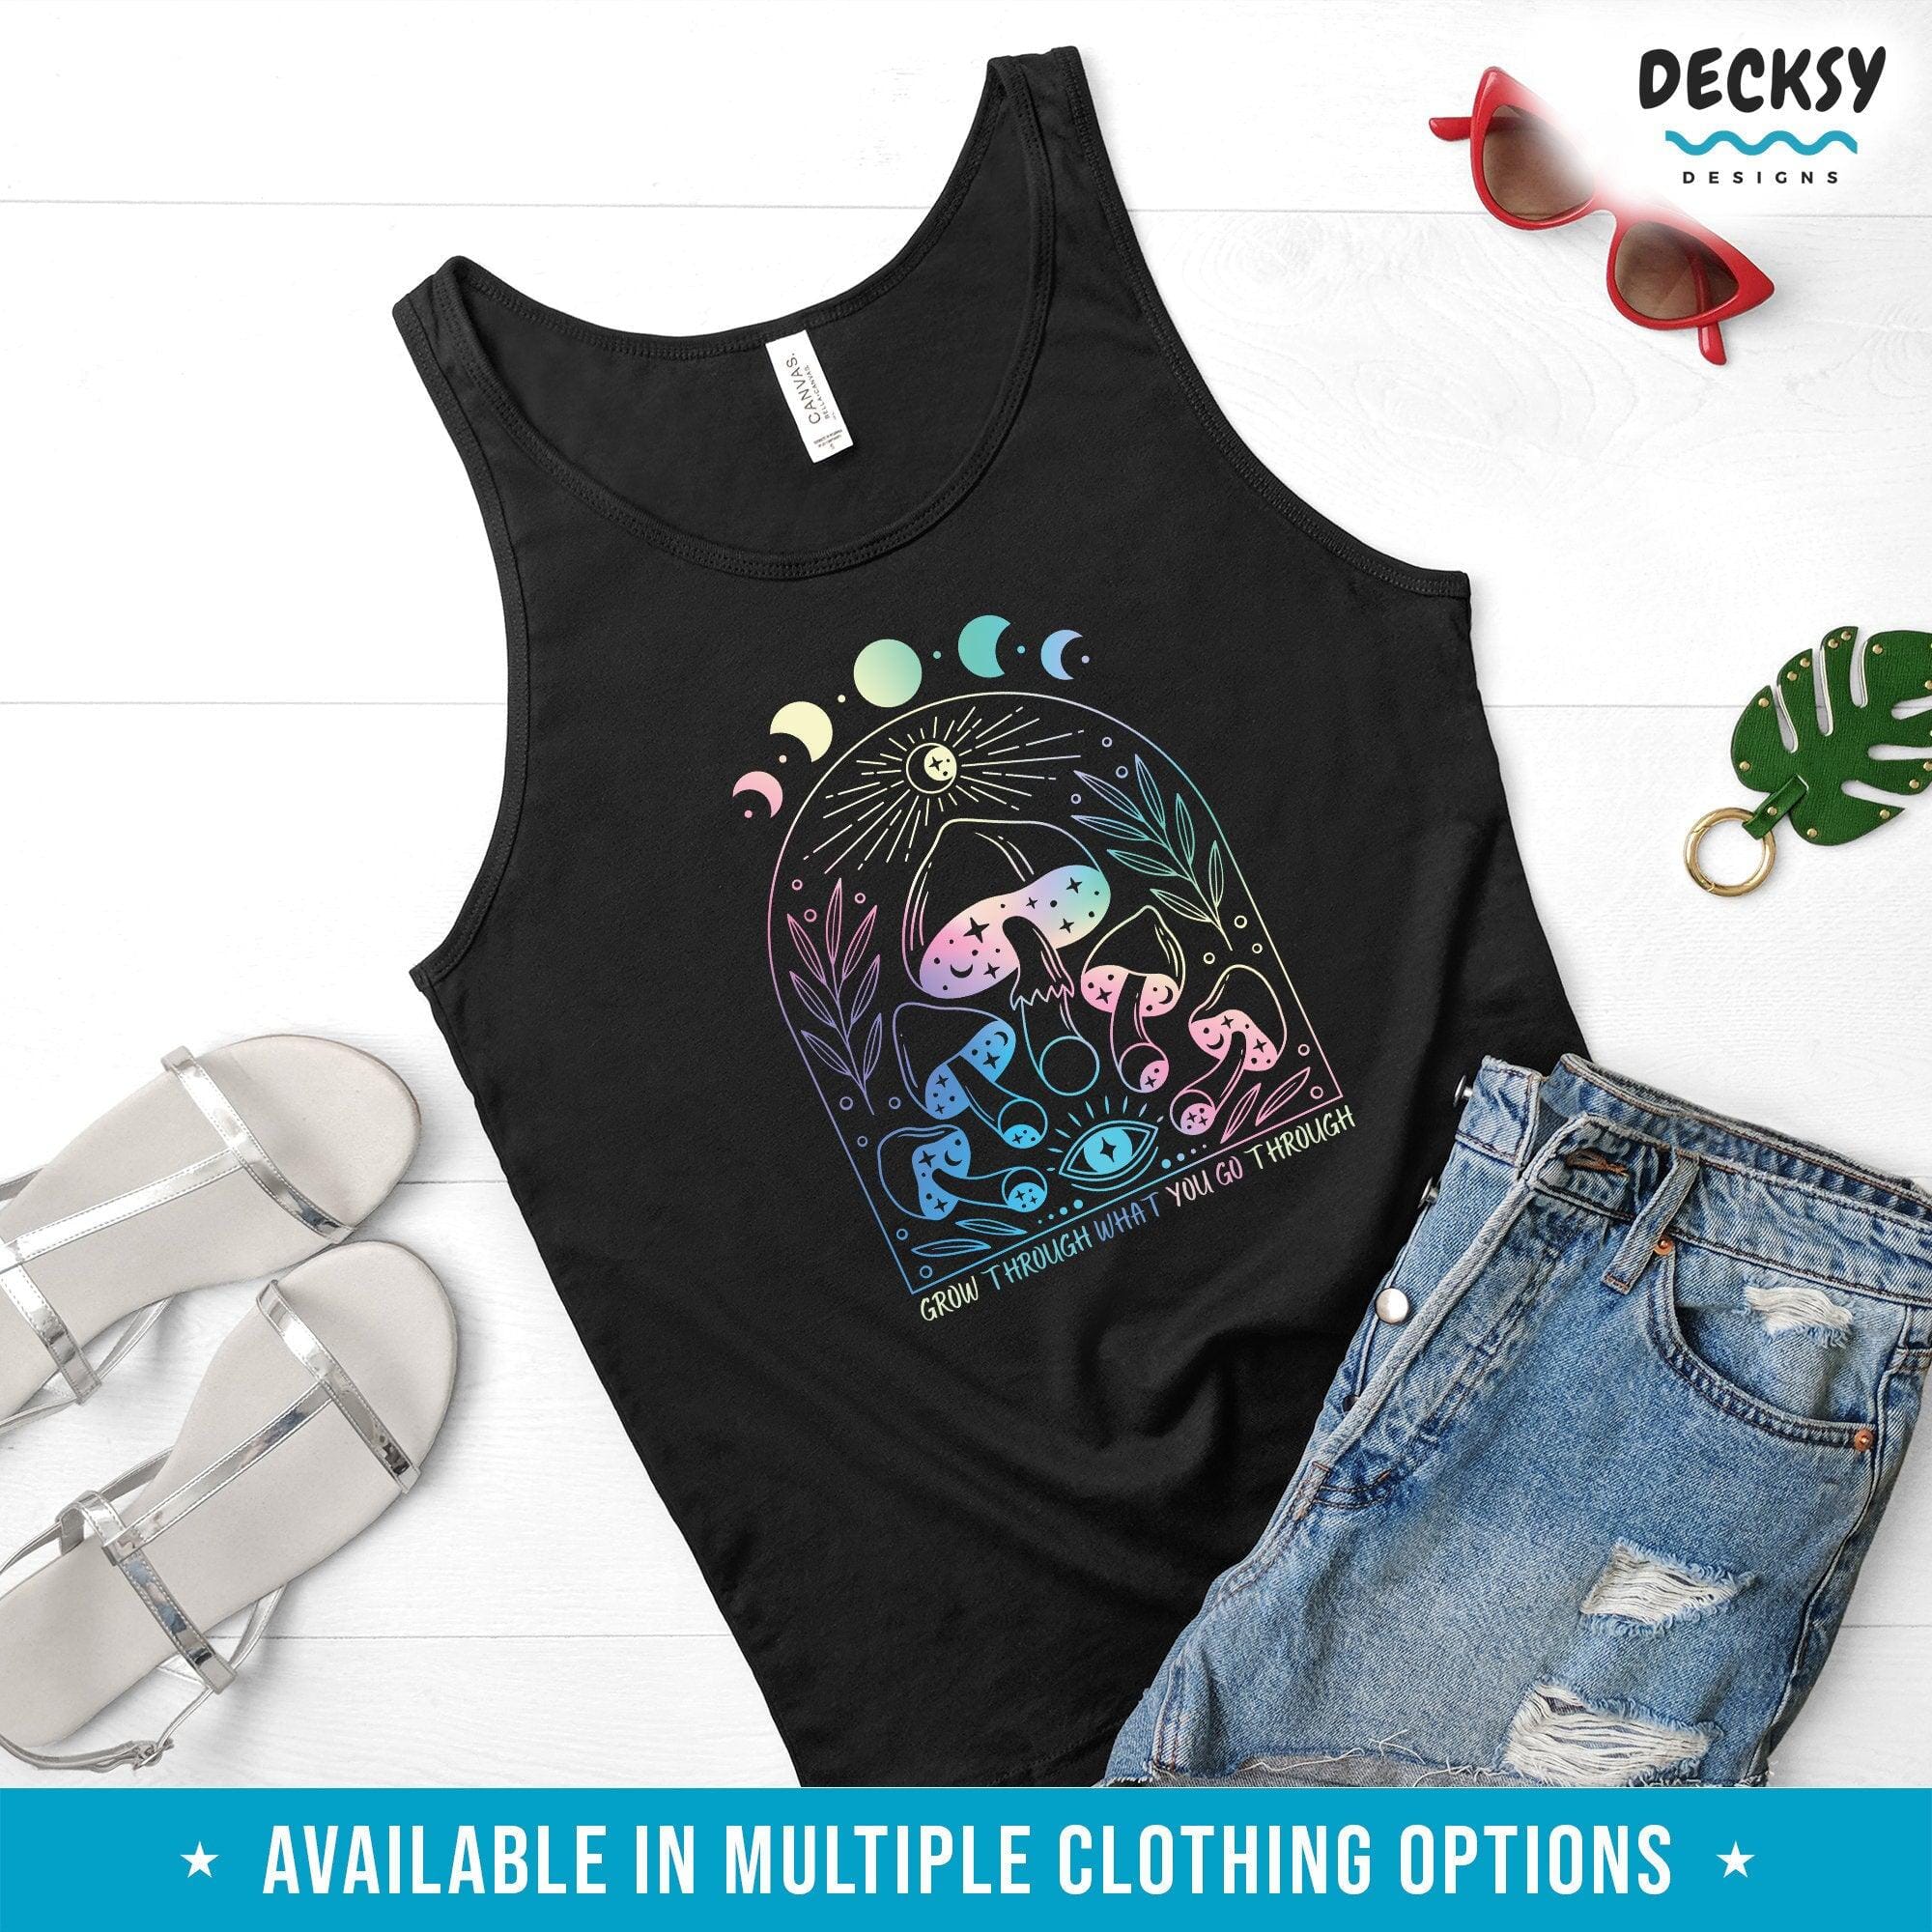 Mushroom Shirt, Gift for Friend-Clothing:Gender-Neutral Adult Clothing:Tops & Tees:T-shirts:Graphic Tees-DecksyDesigns